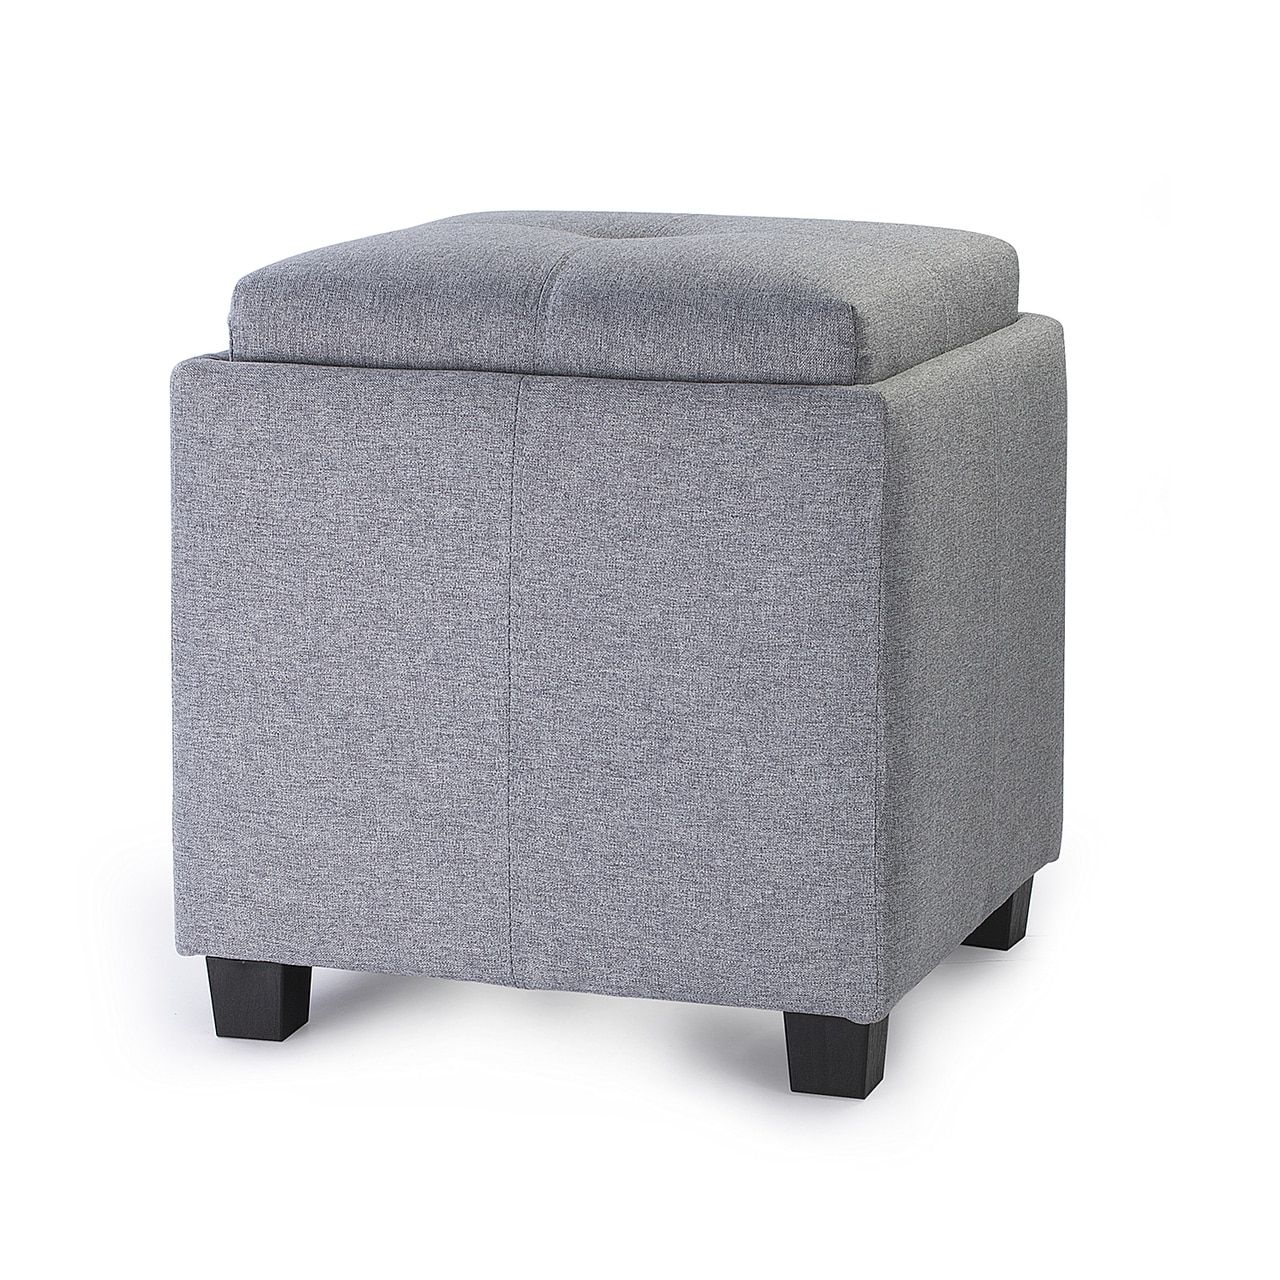 Most Current Natural Fabric Square Ottomans Intended For Enova Home Victoria 18 Inches Modern Linen Fabric Square Storage (View 6 of 10)